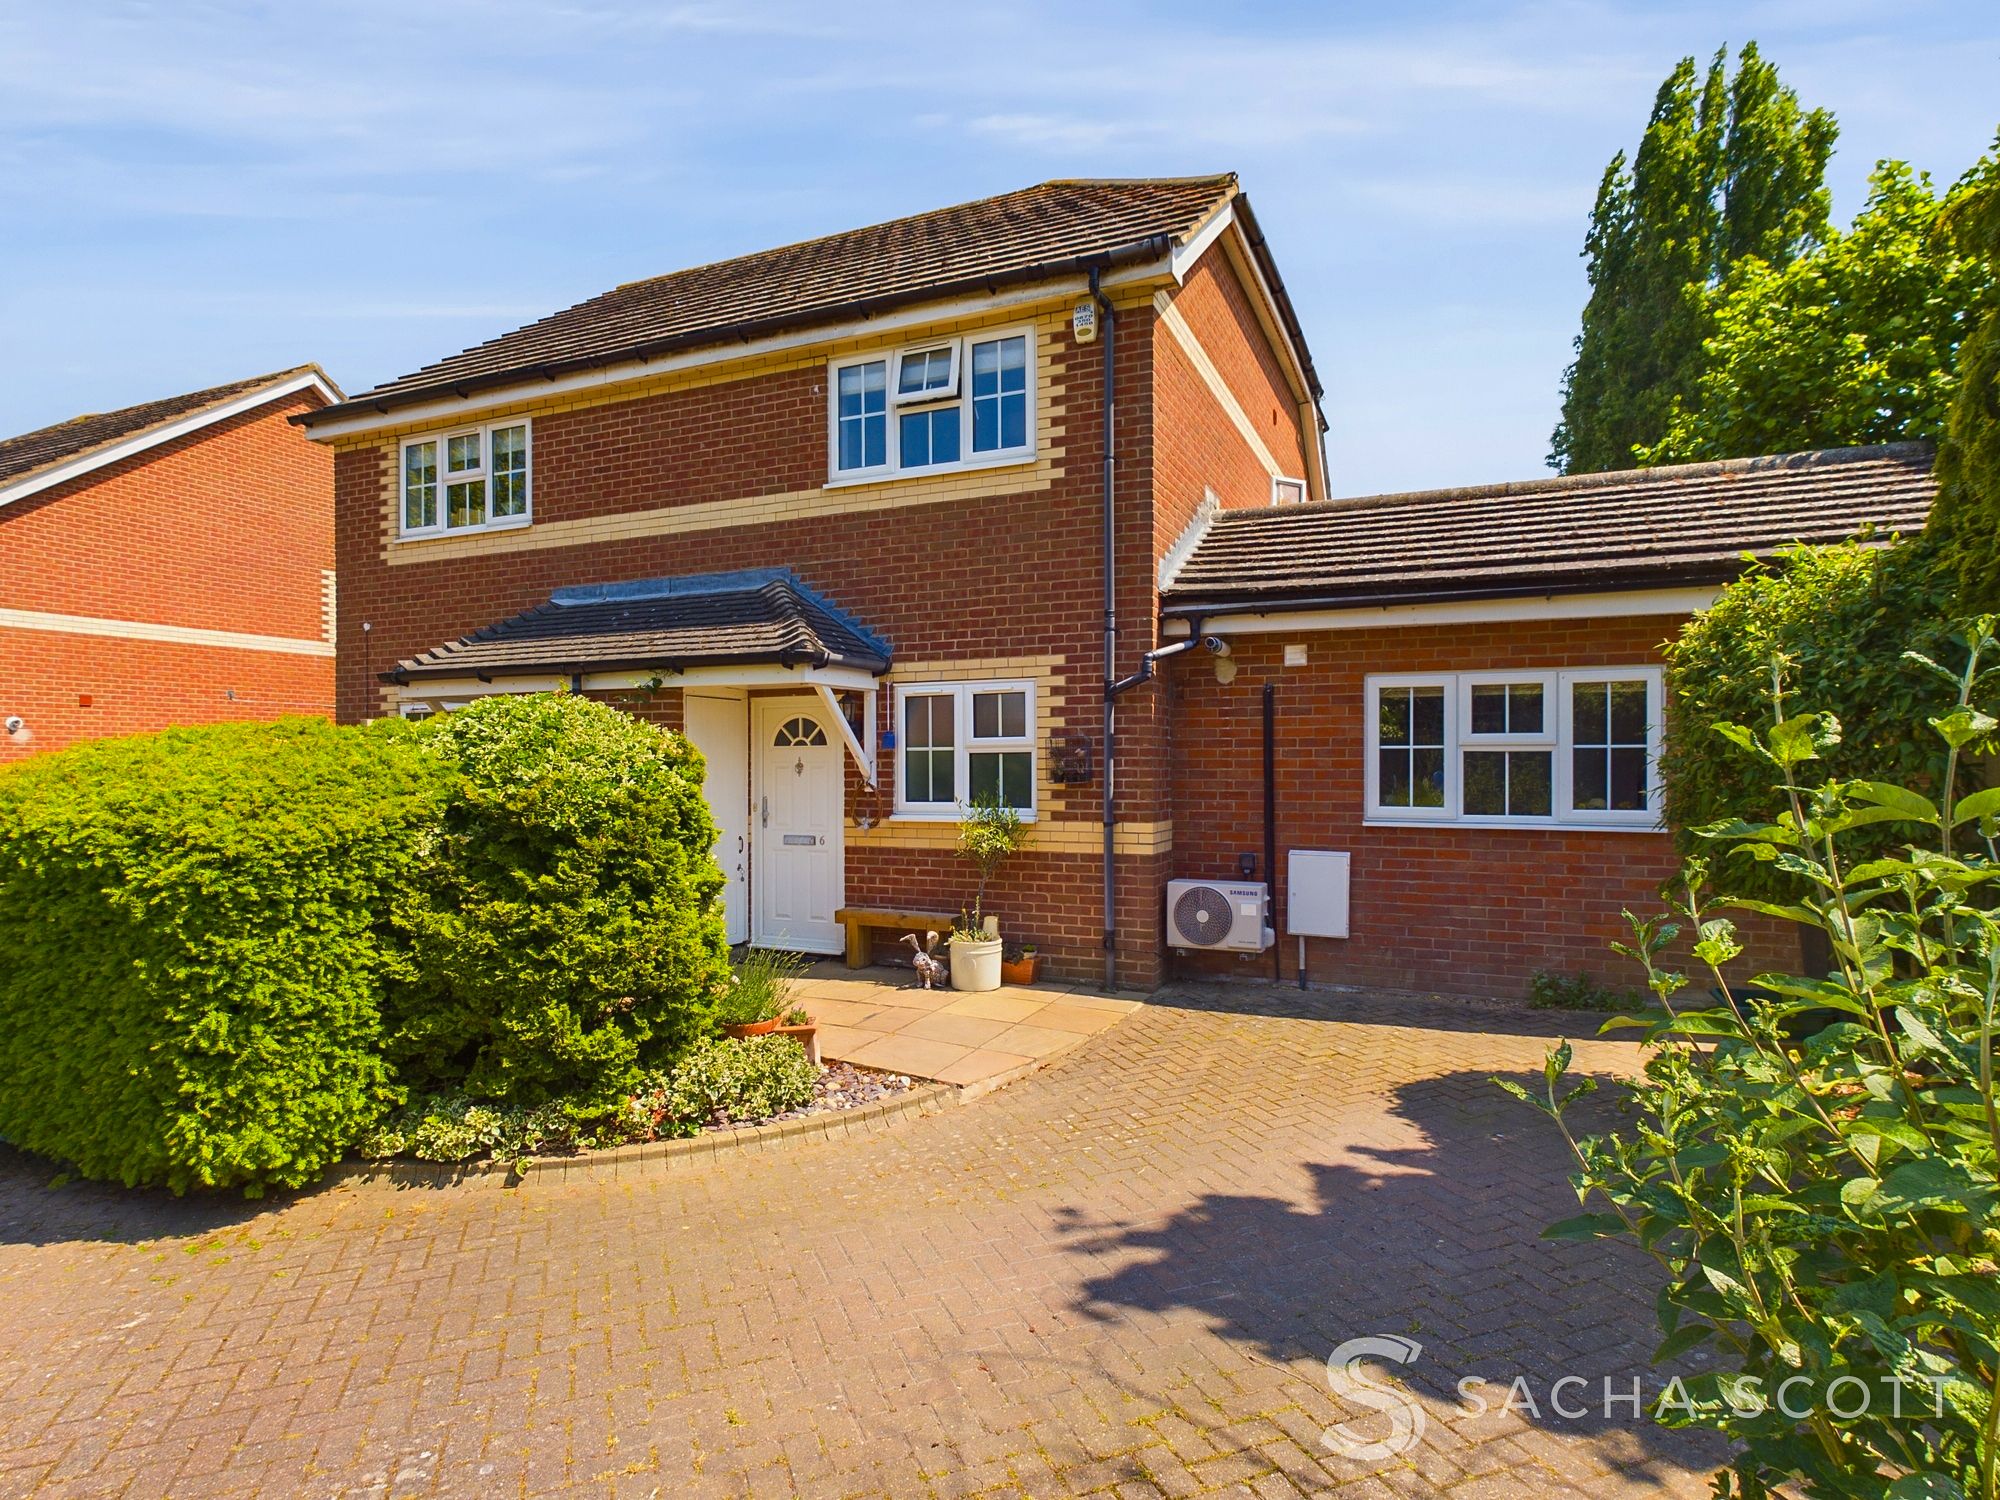 2 bed detached house for sale in Richards Field, Epsom - Property Image 1